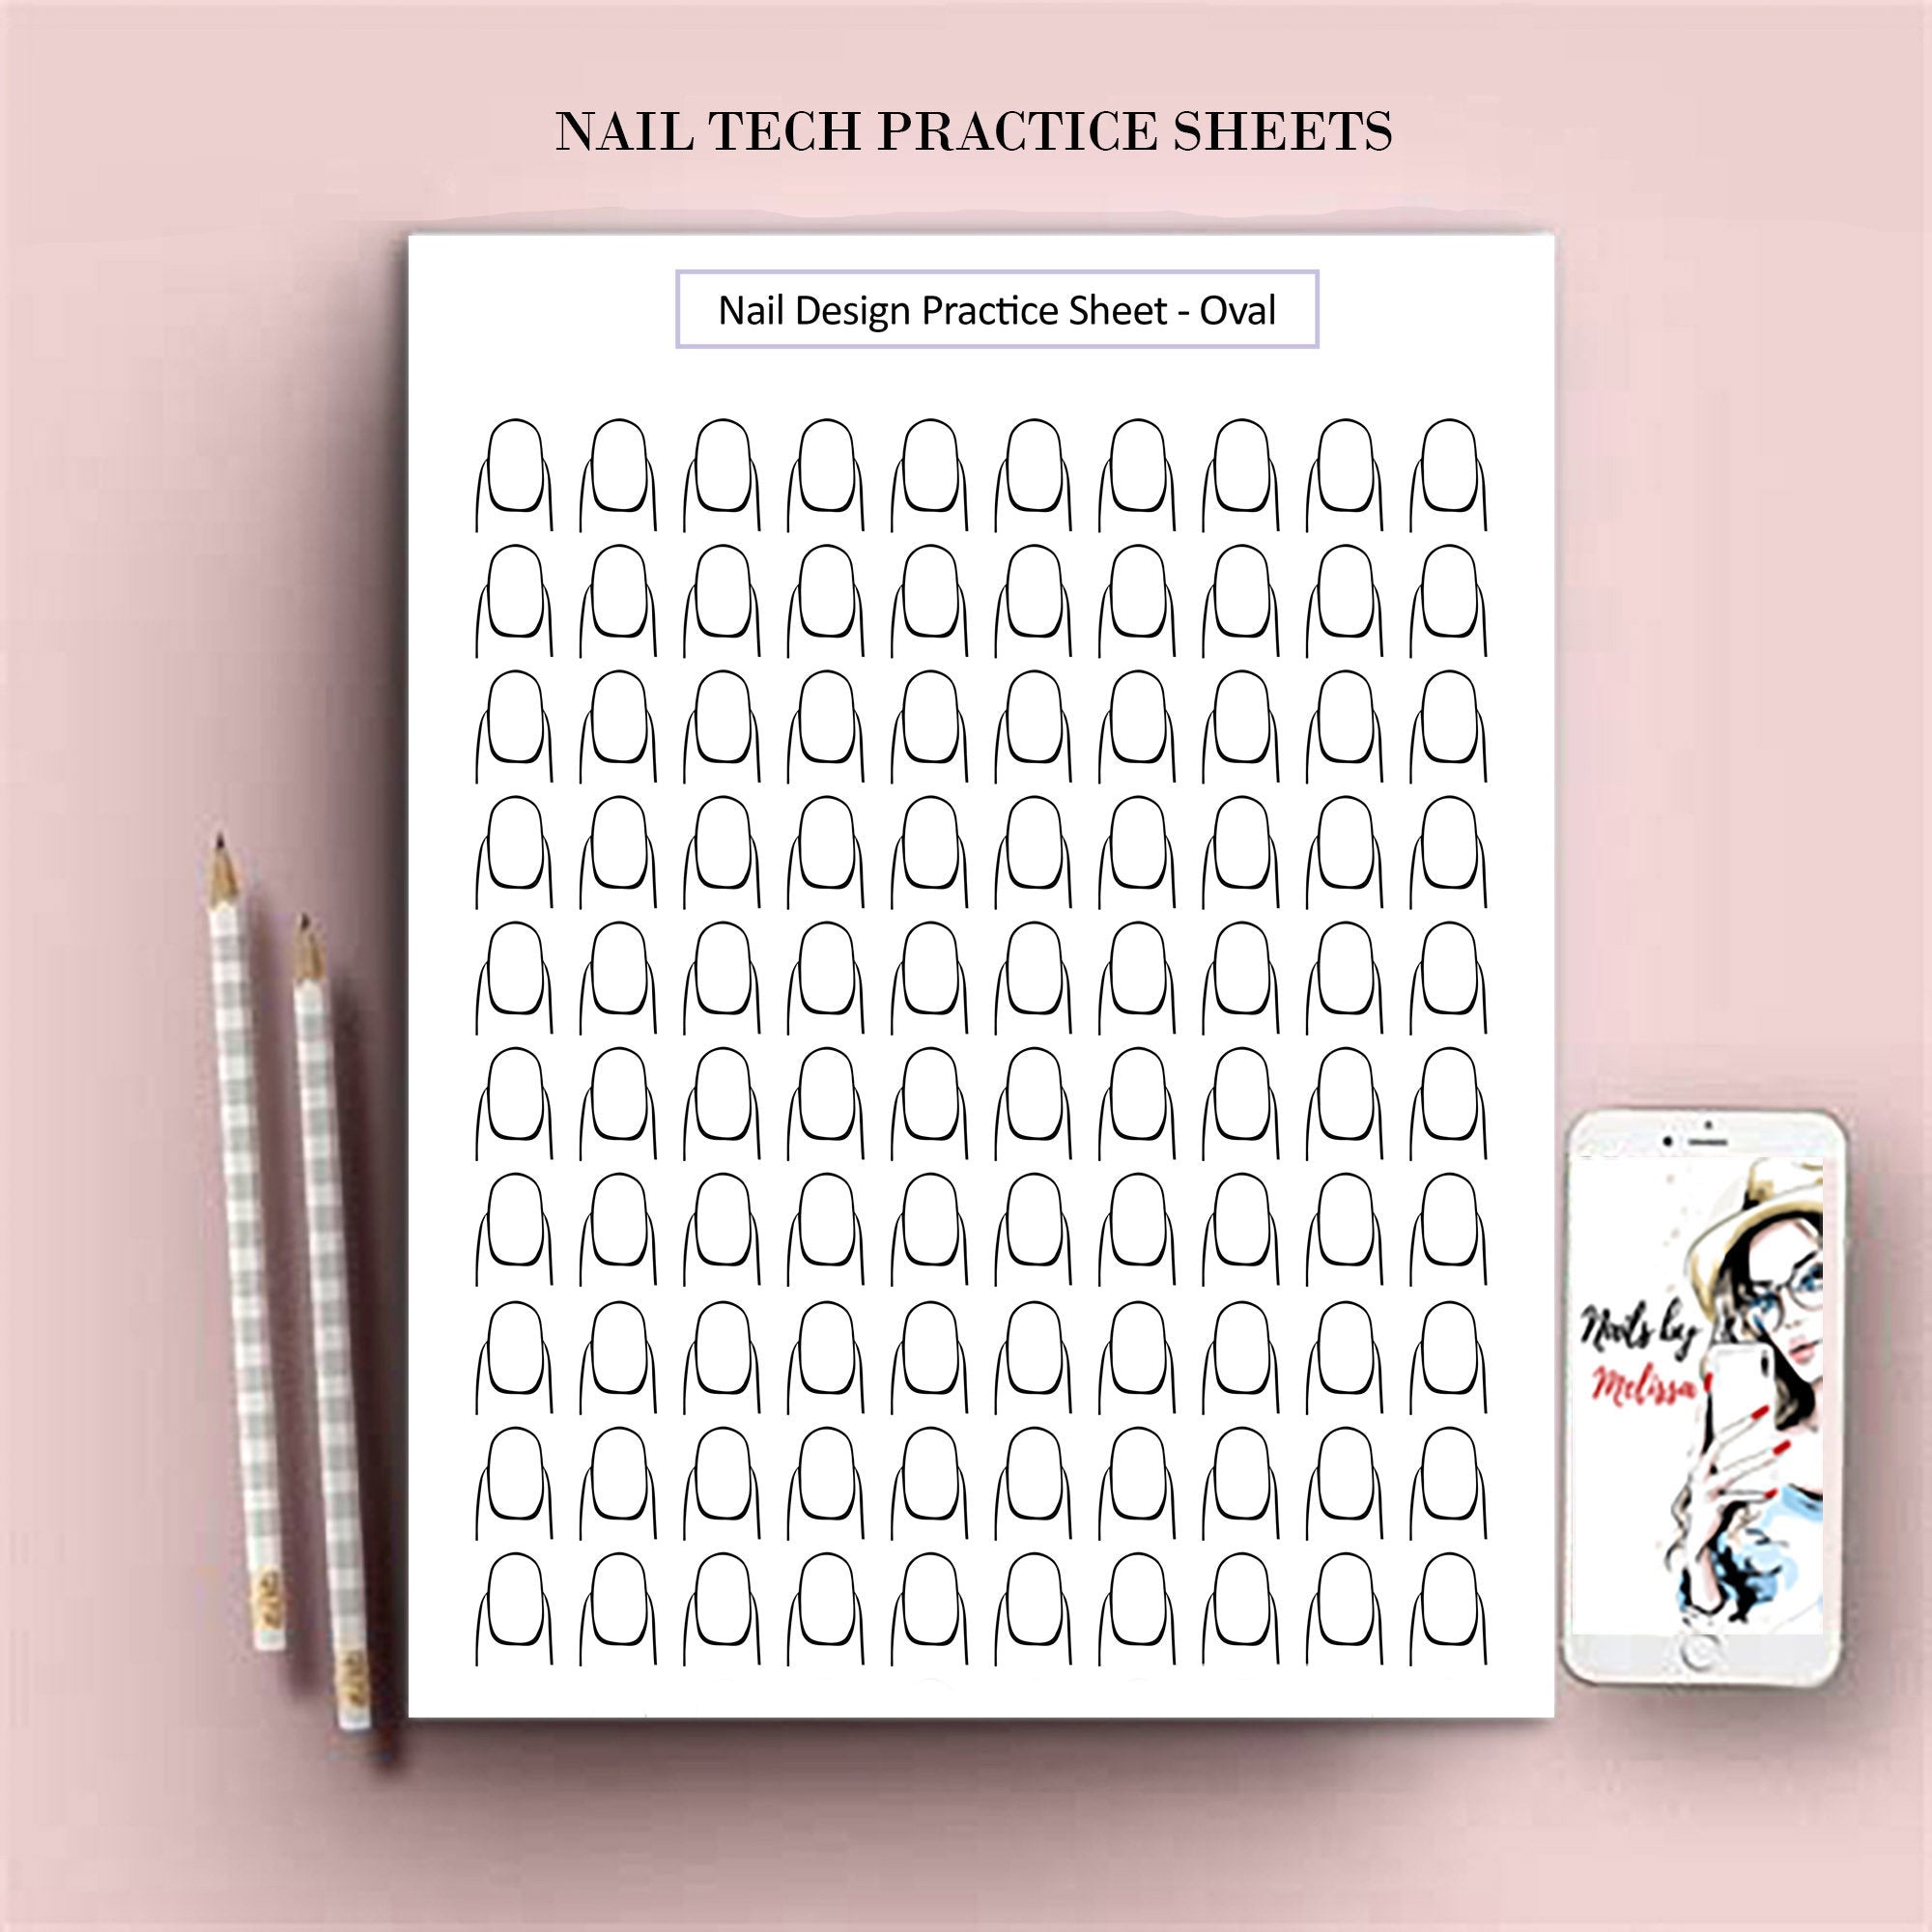 Nail Tech Practice Forms